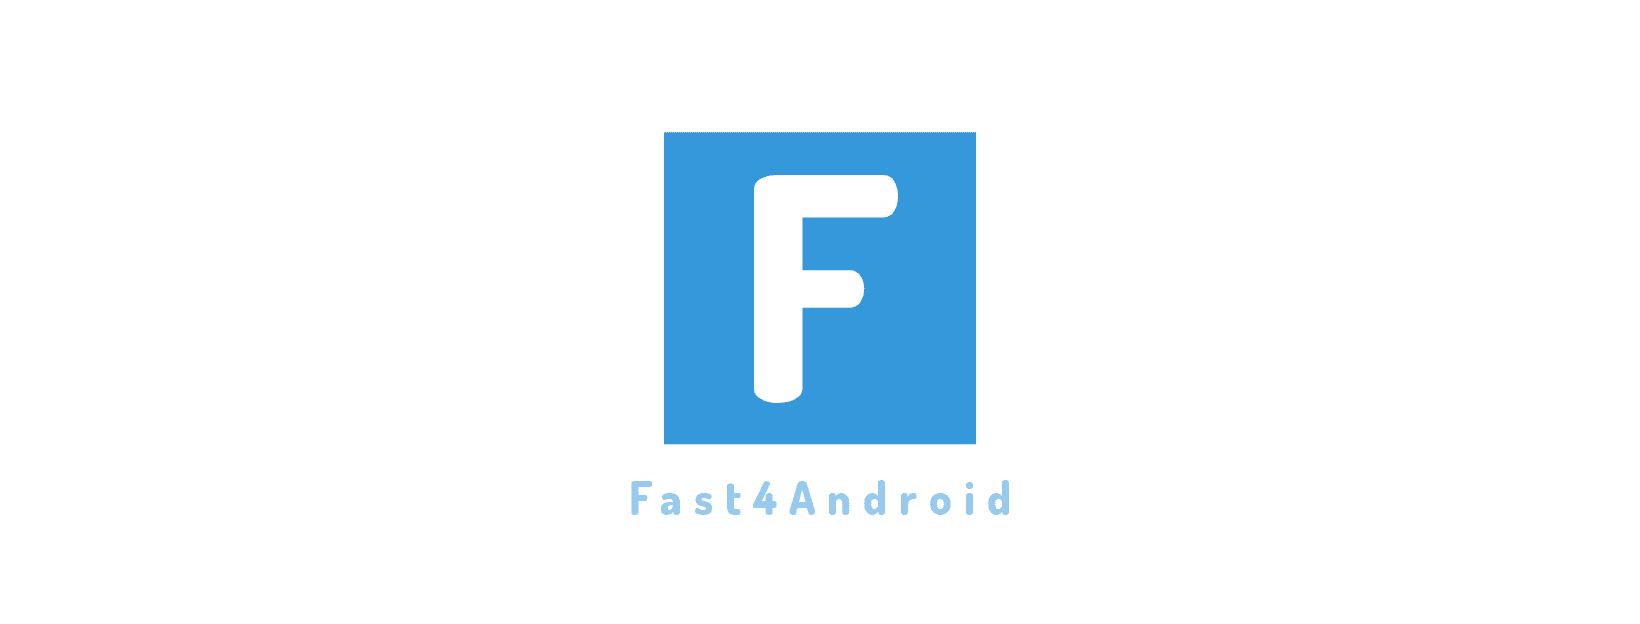 fast4android